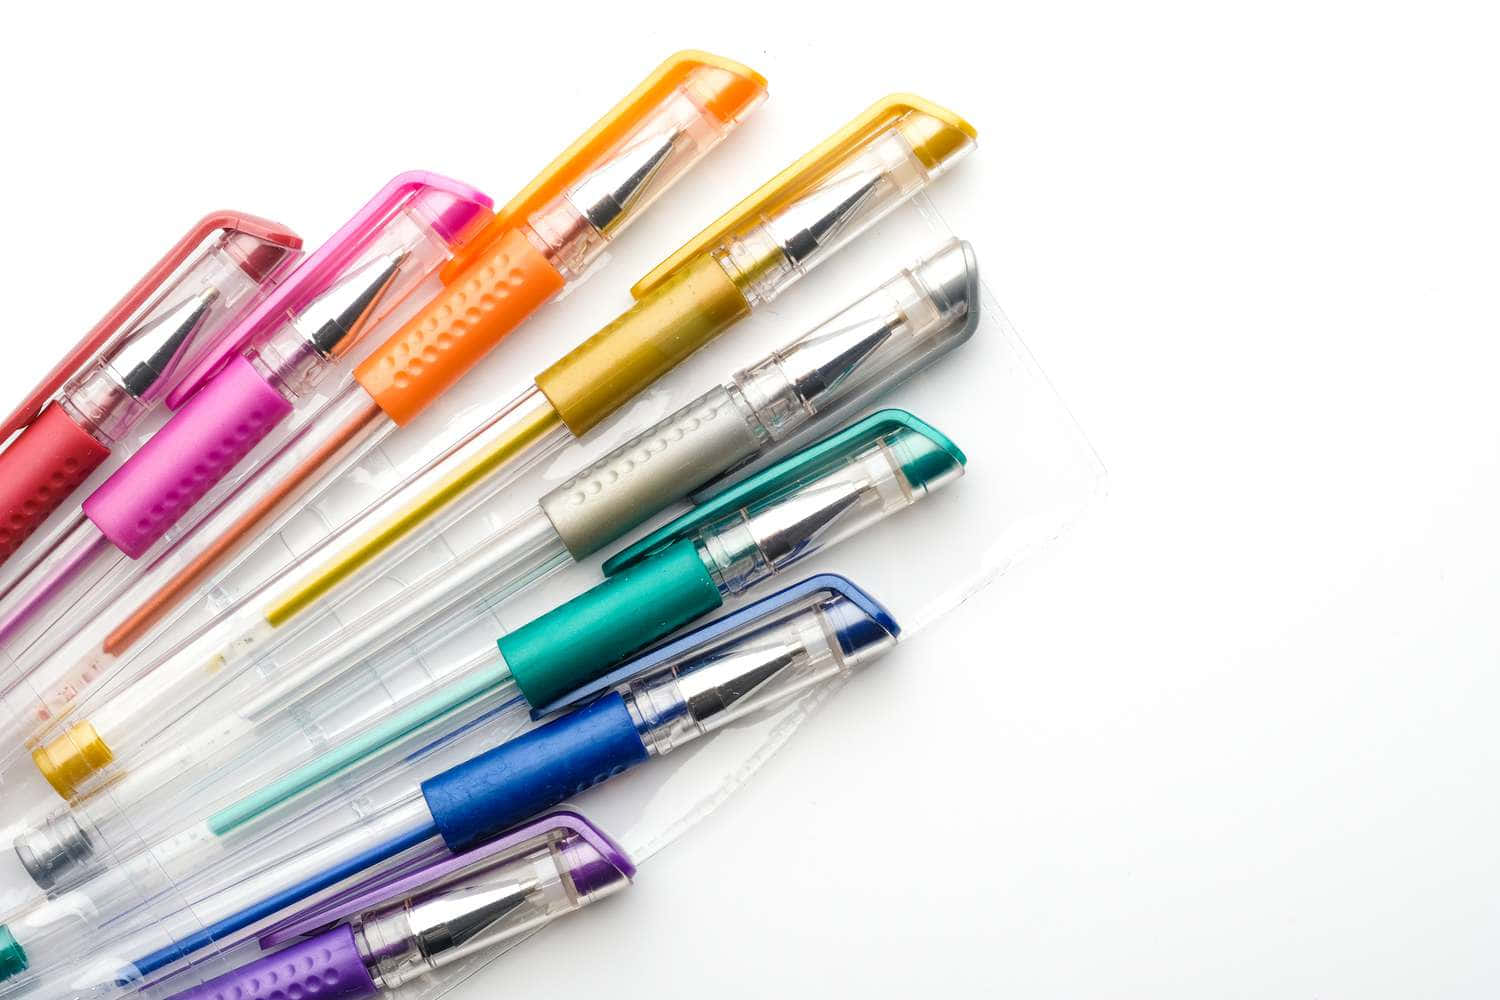 A Group Of Colorful Pens On A White Background